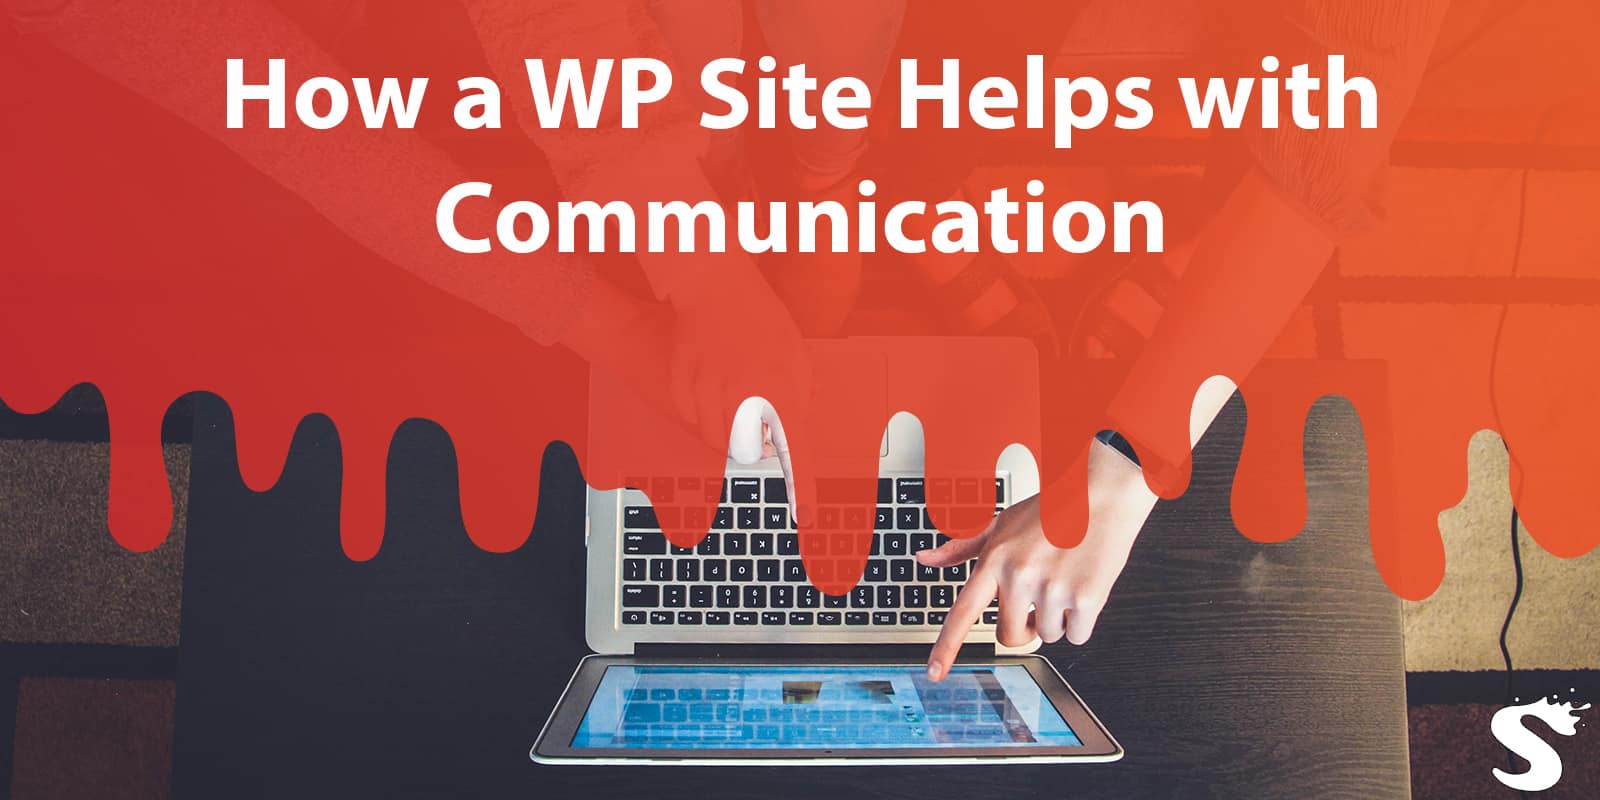 How Having a Site on the WordPress Platform Can Help You Communicate Better With Potential Customers